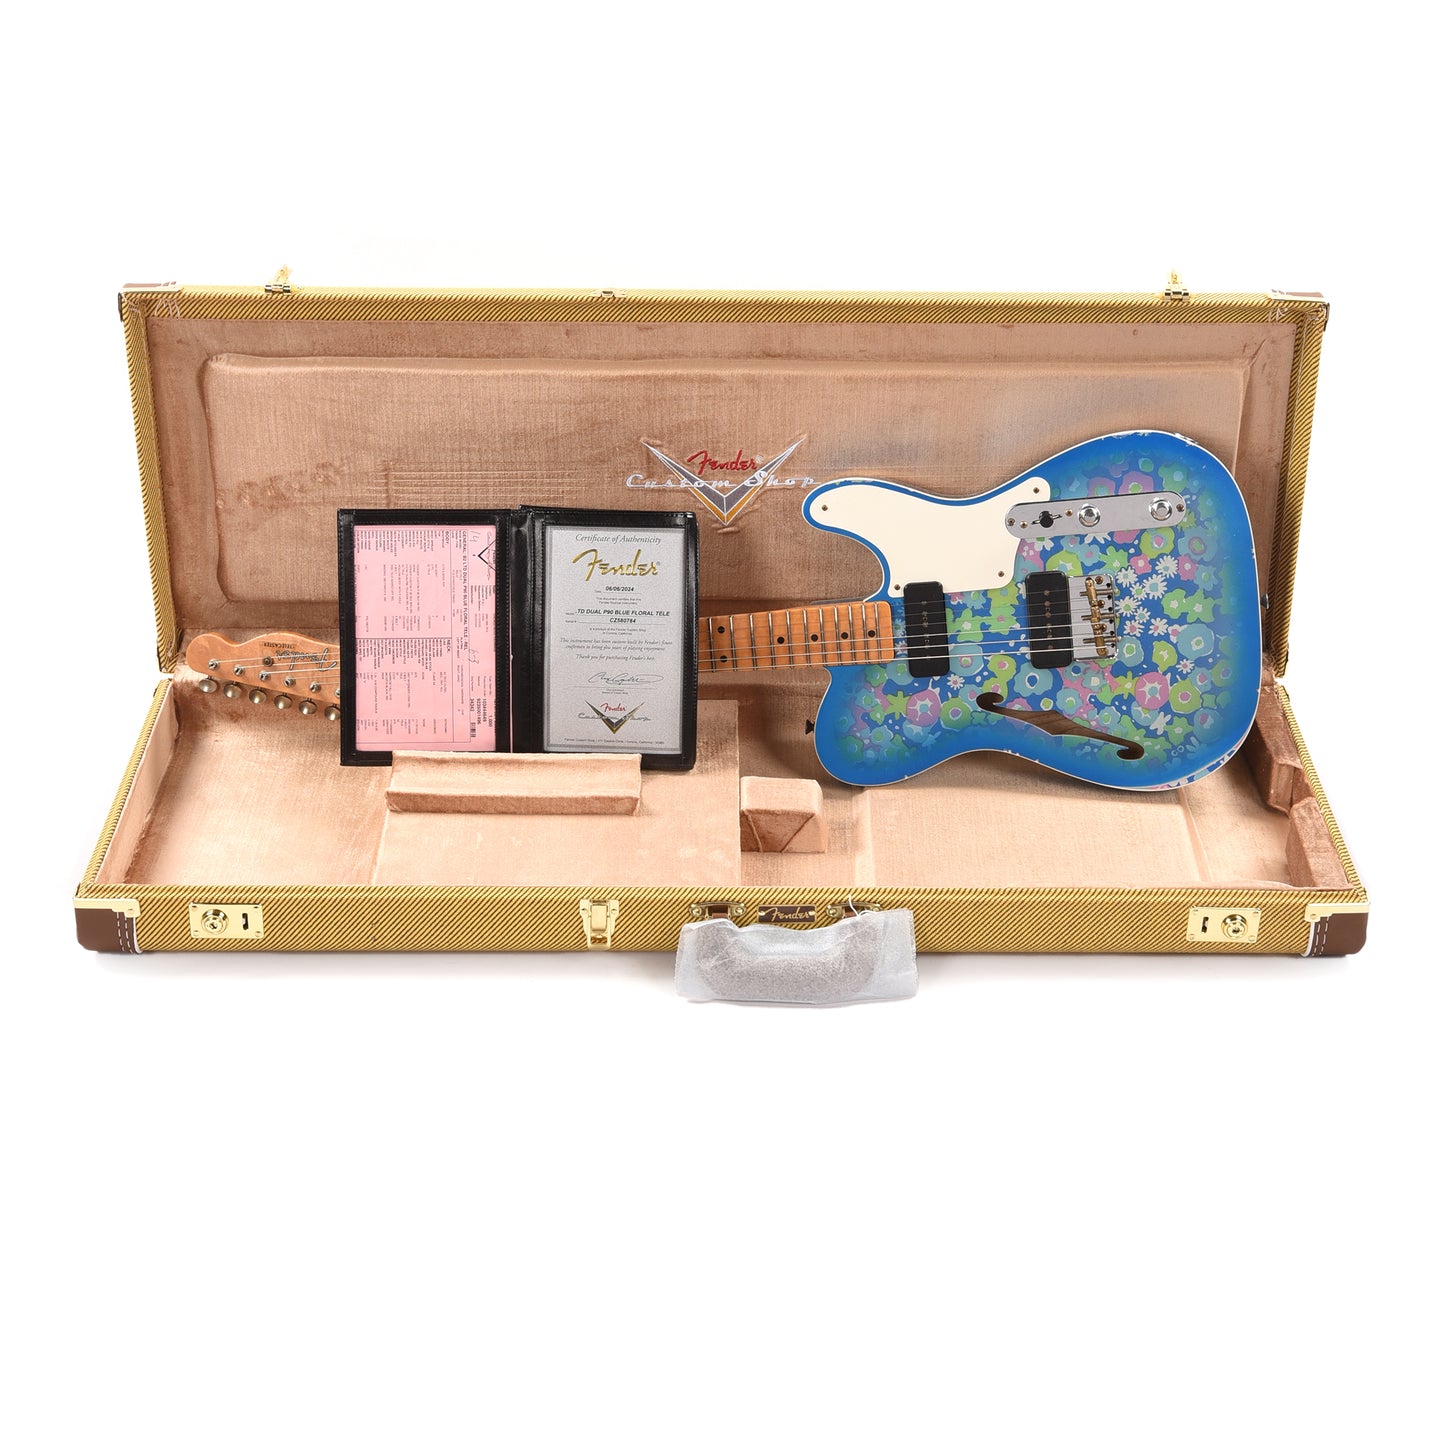 Fender Custom Shop Limited Edition Dual P90 Telecaster Relic Blue Floral